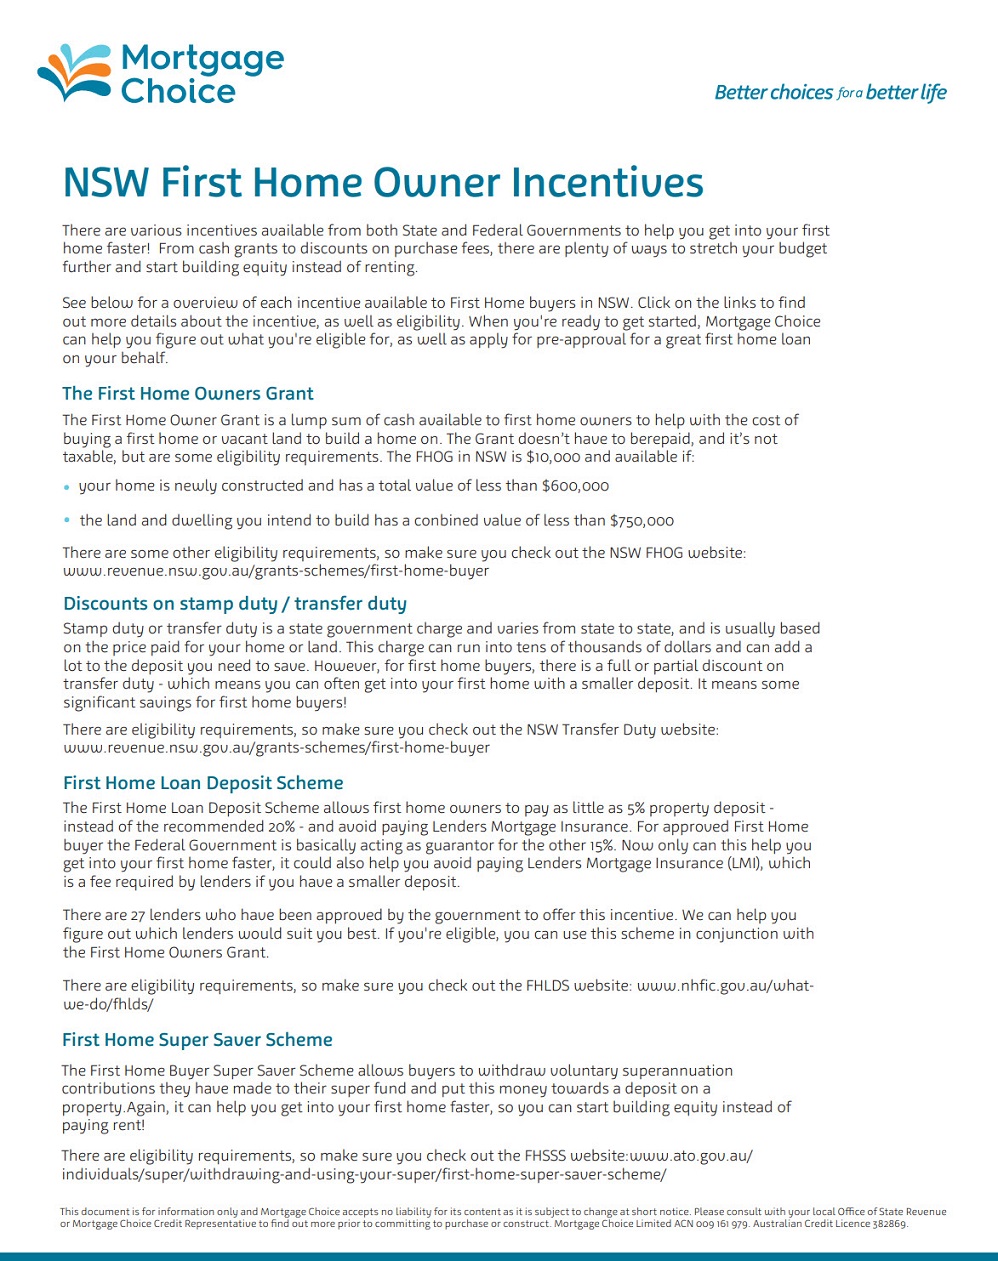 nsw-first-home-buyer-incentives-cover-jpg